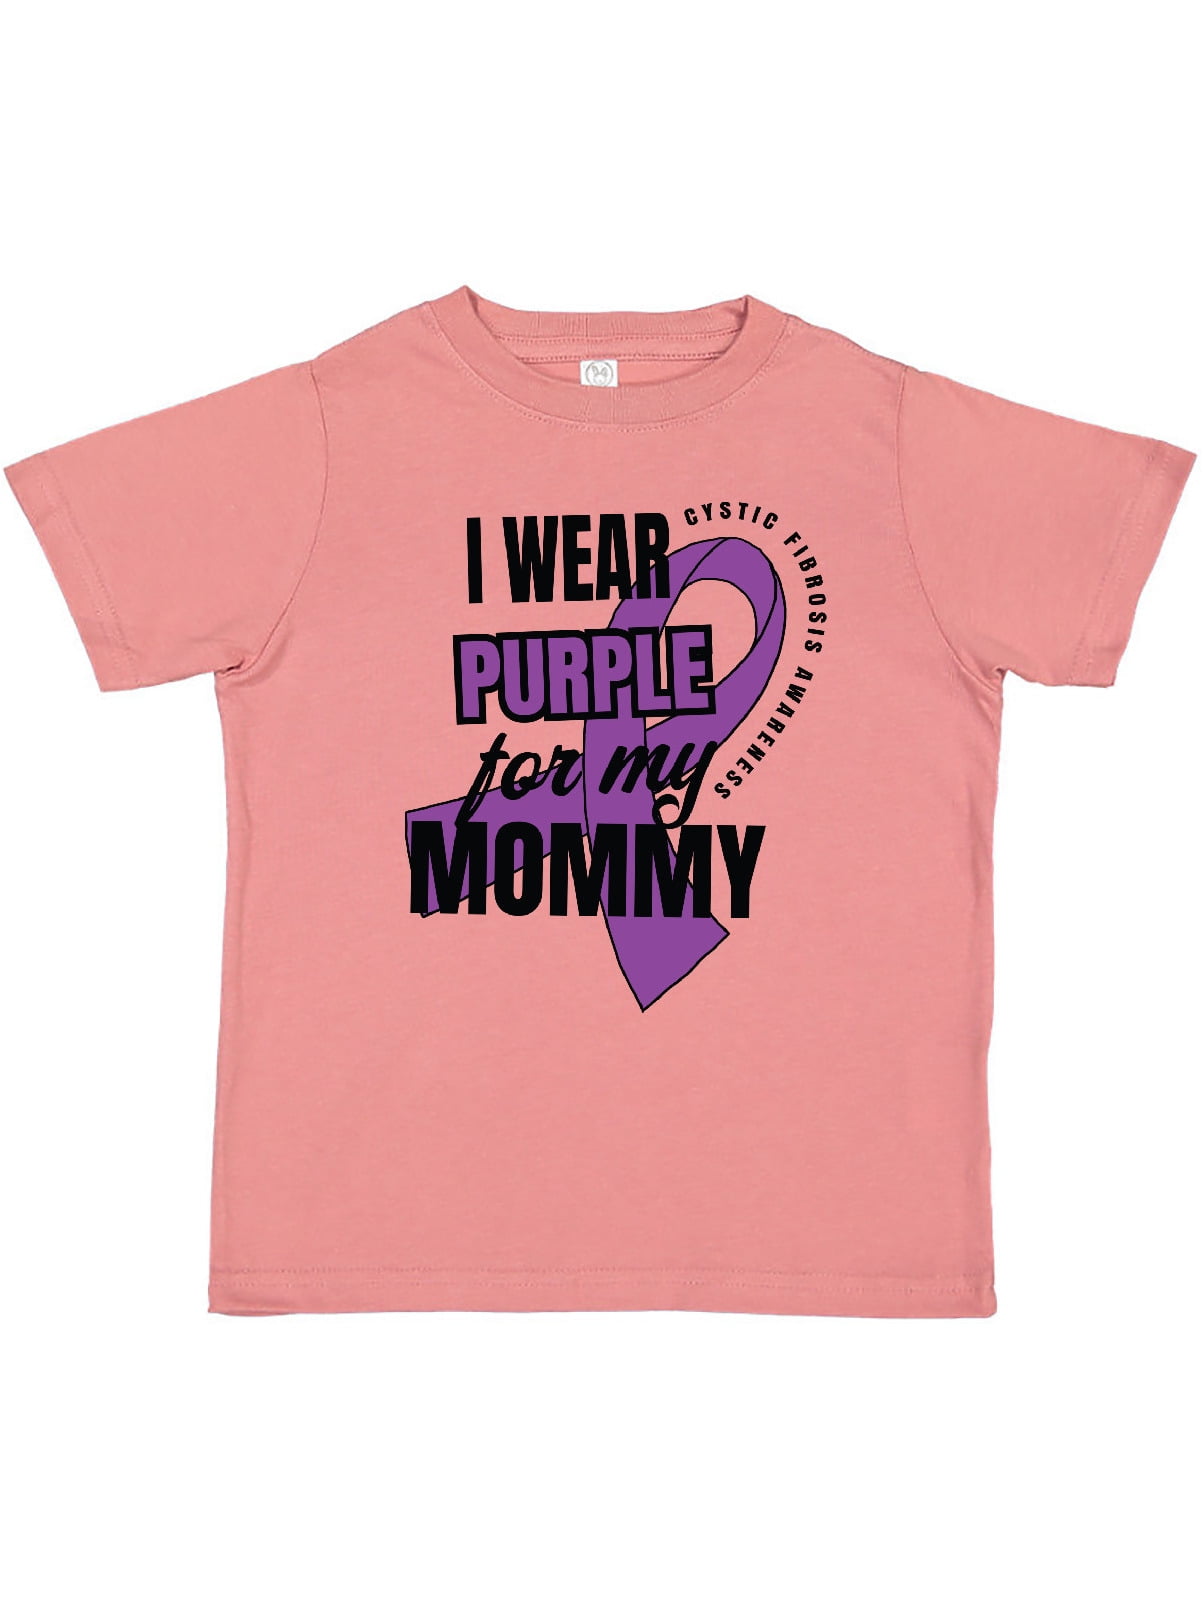 inktastic I Wear Purple for My Momma Cystic Fibrosis Awareness Baby T-Shirt